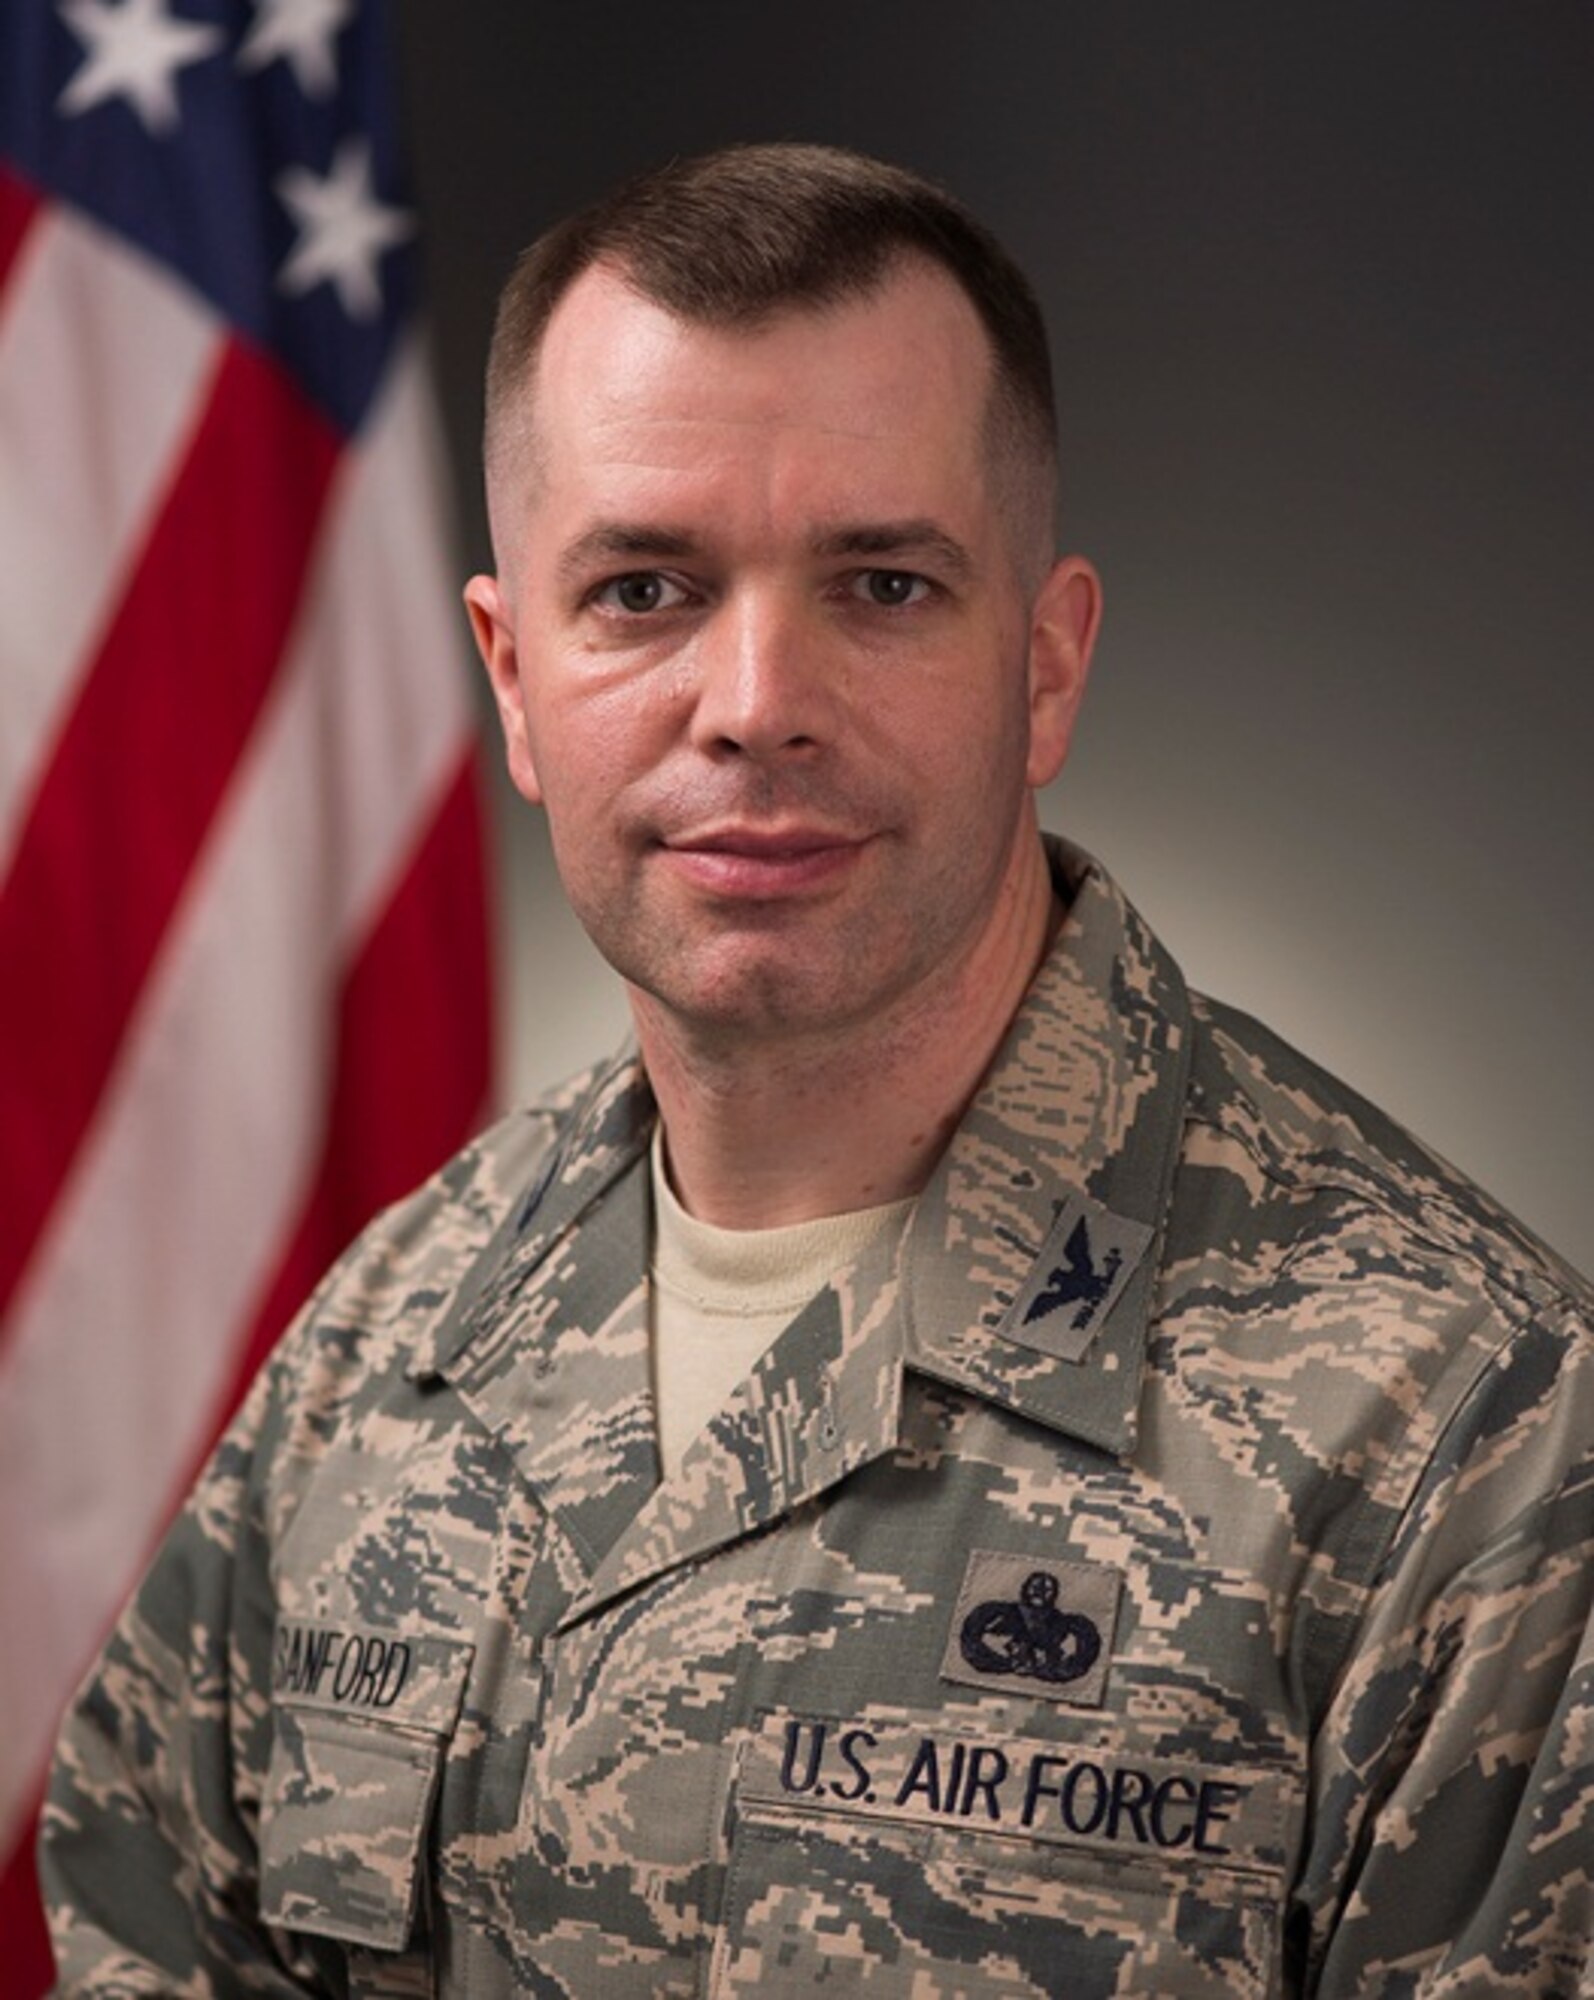 386th Expeditionary Mission Support Group commander's official photo.